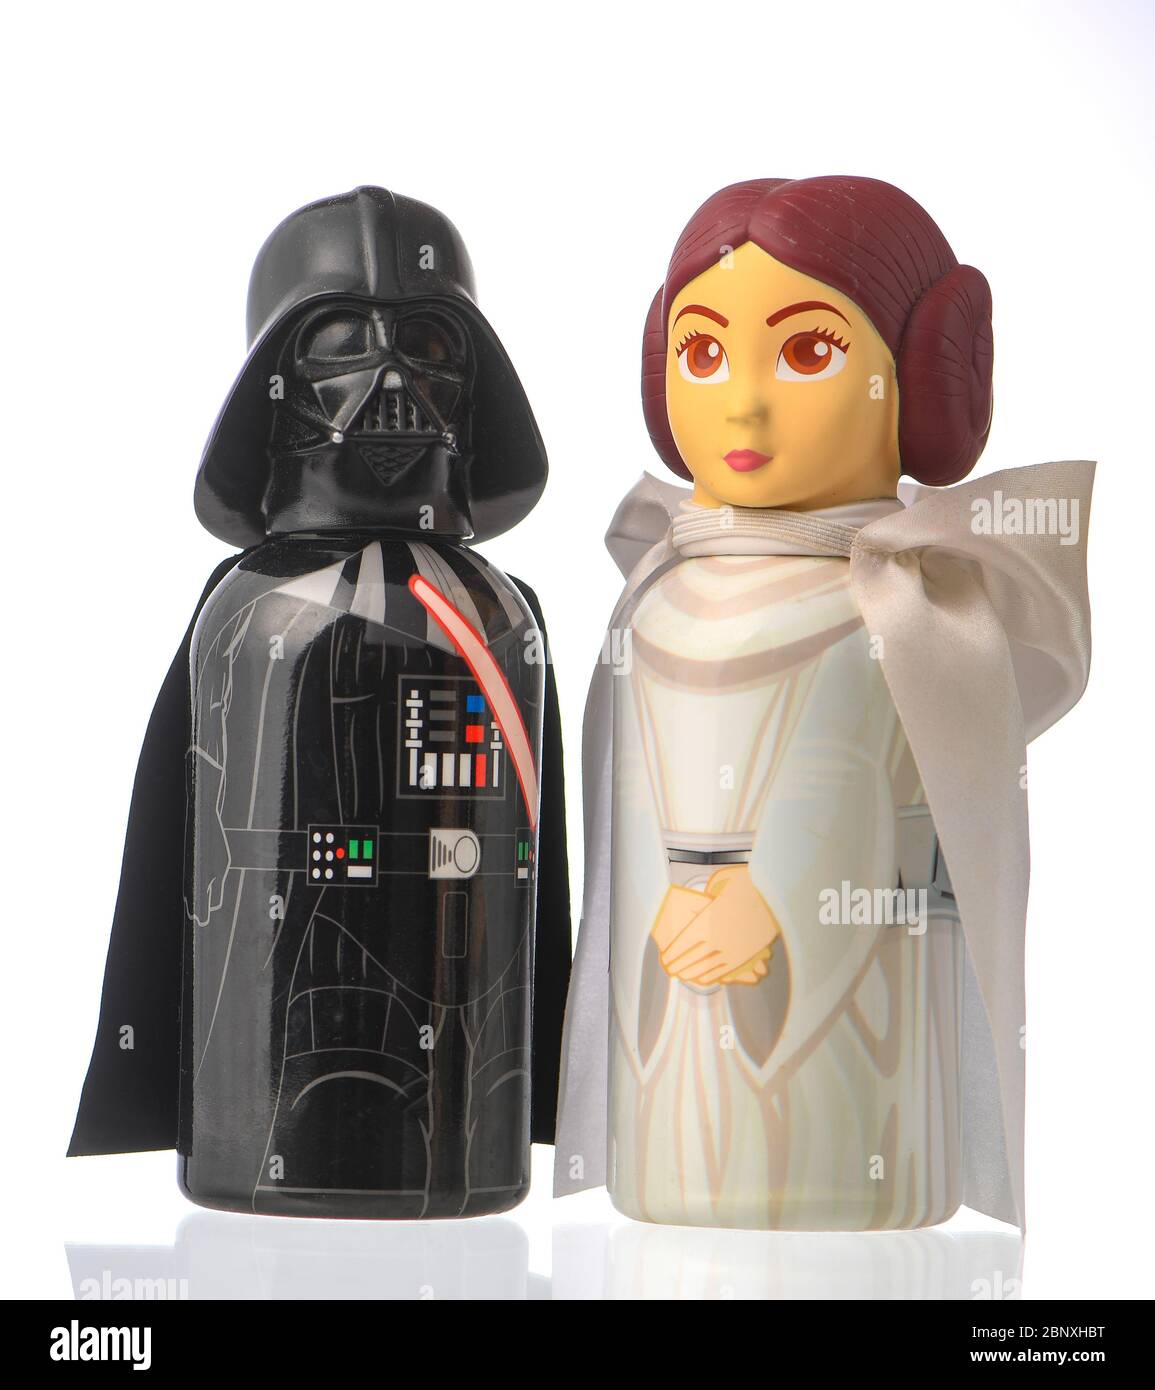 Starwars based novelty bubble bath shaped like characters from the film. Darth vader and princess leia set isolated on a white background. Stock Photo